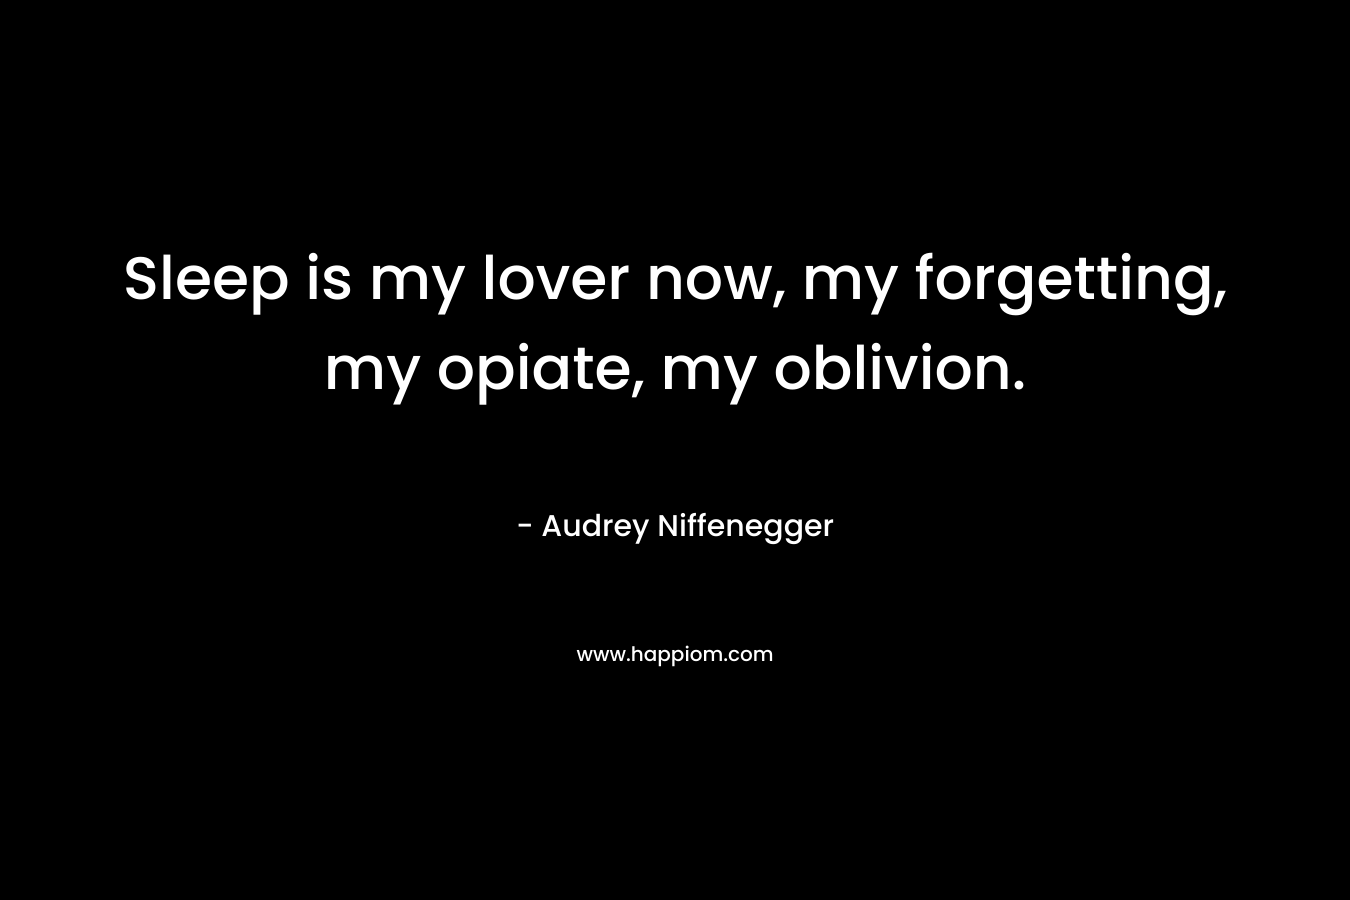 Sleep is my lover now, my forgetting, my opiate, my oblivion. – Audrey Niffenegger